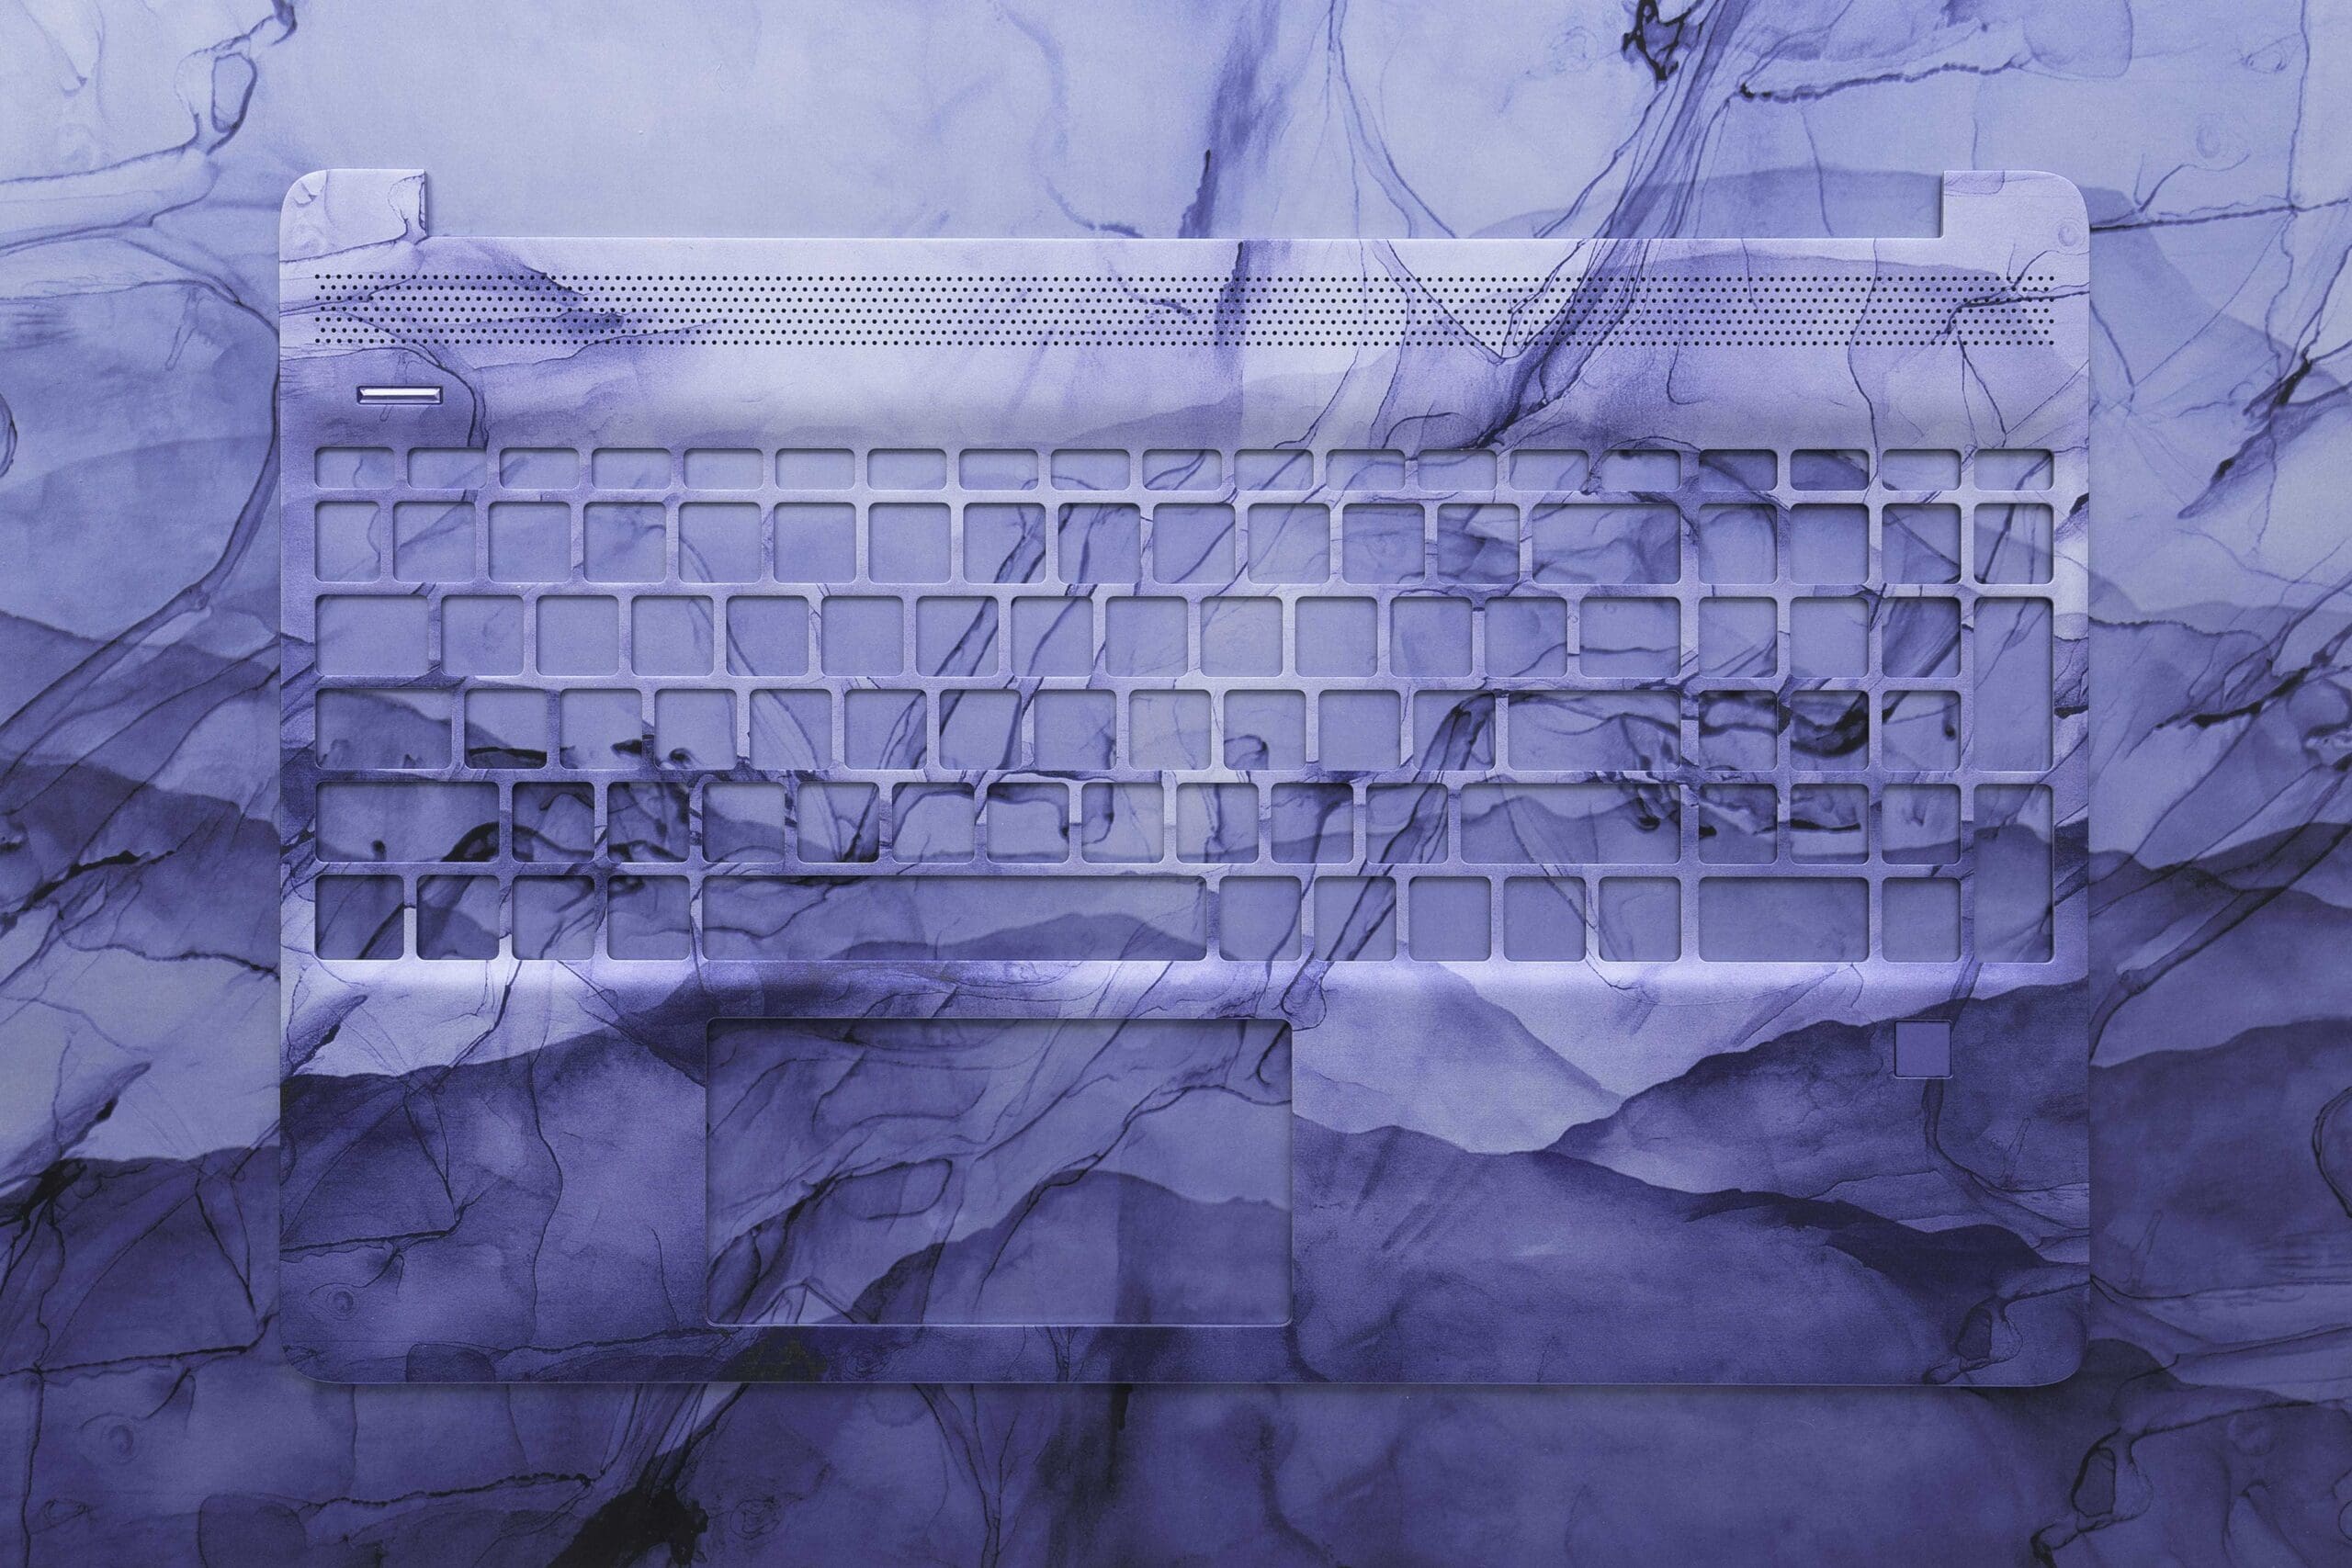 Photo of a blue marbled keyboard cover on a similar background